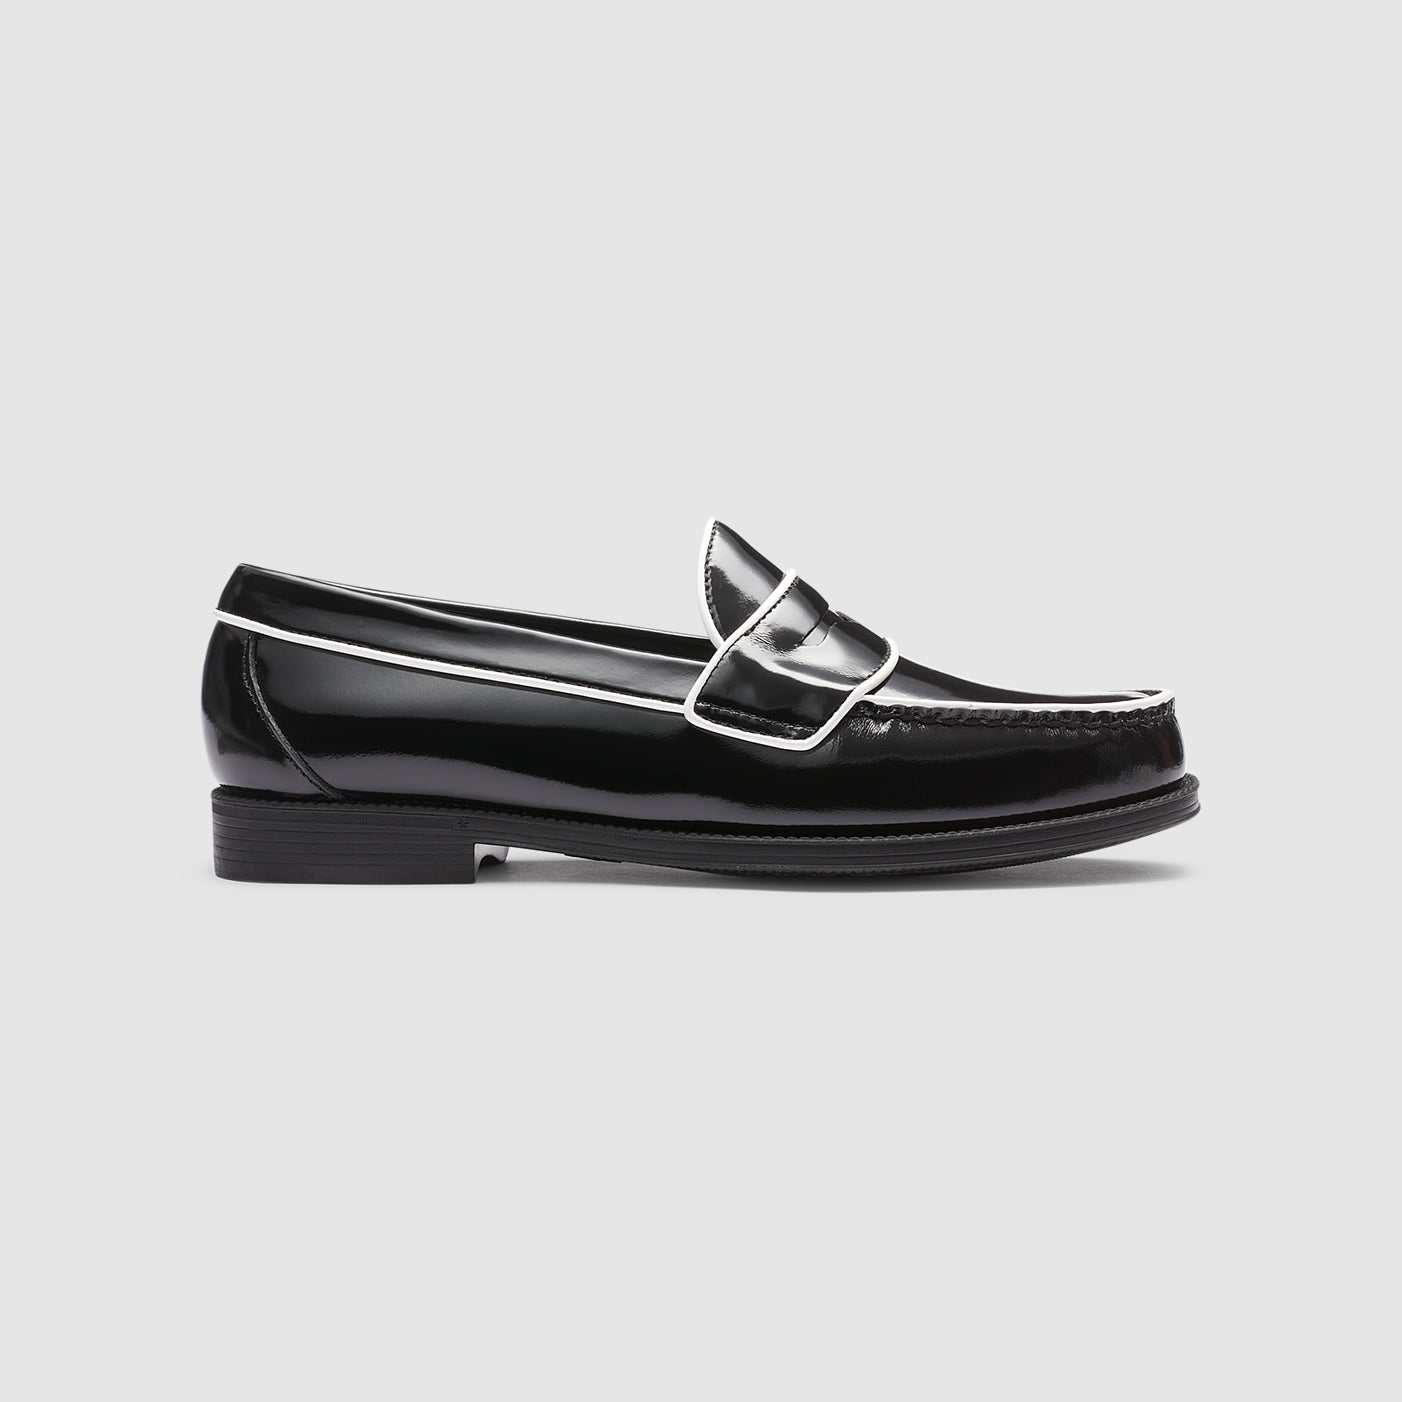 MENS LOGAN PIPING EASY WEEJUNS LOAFER